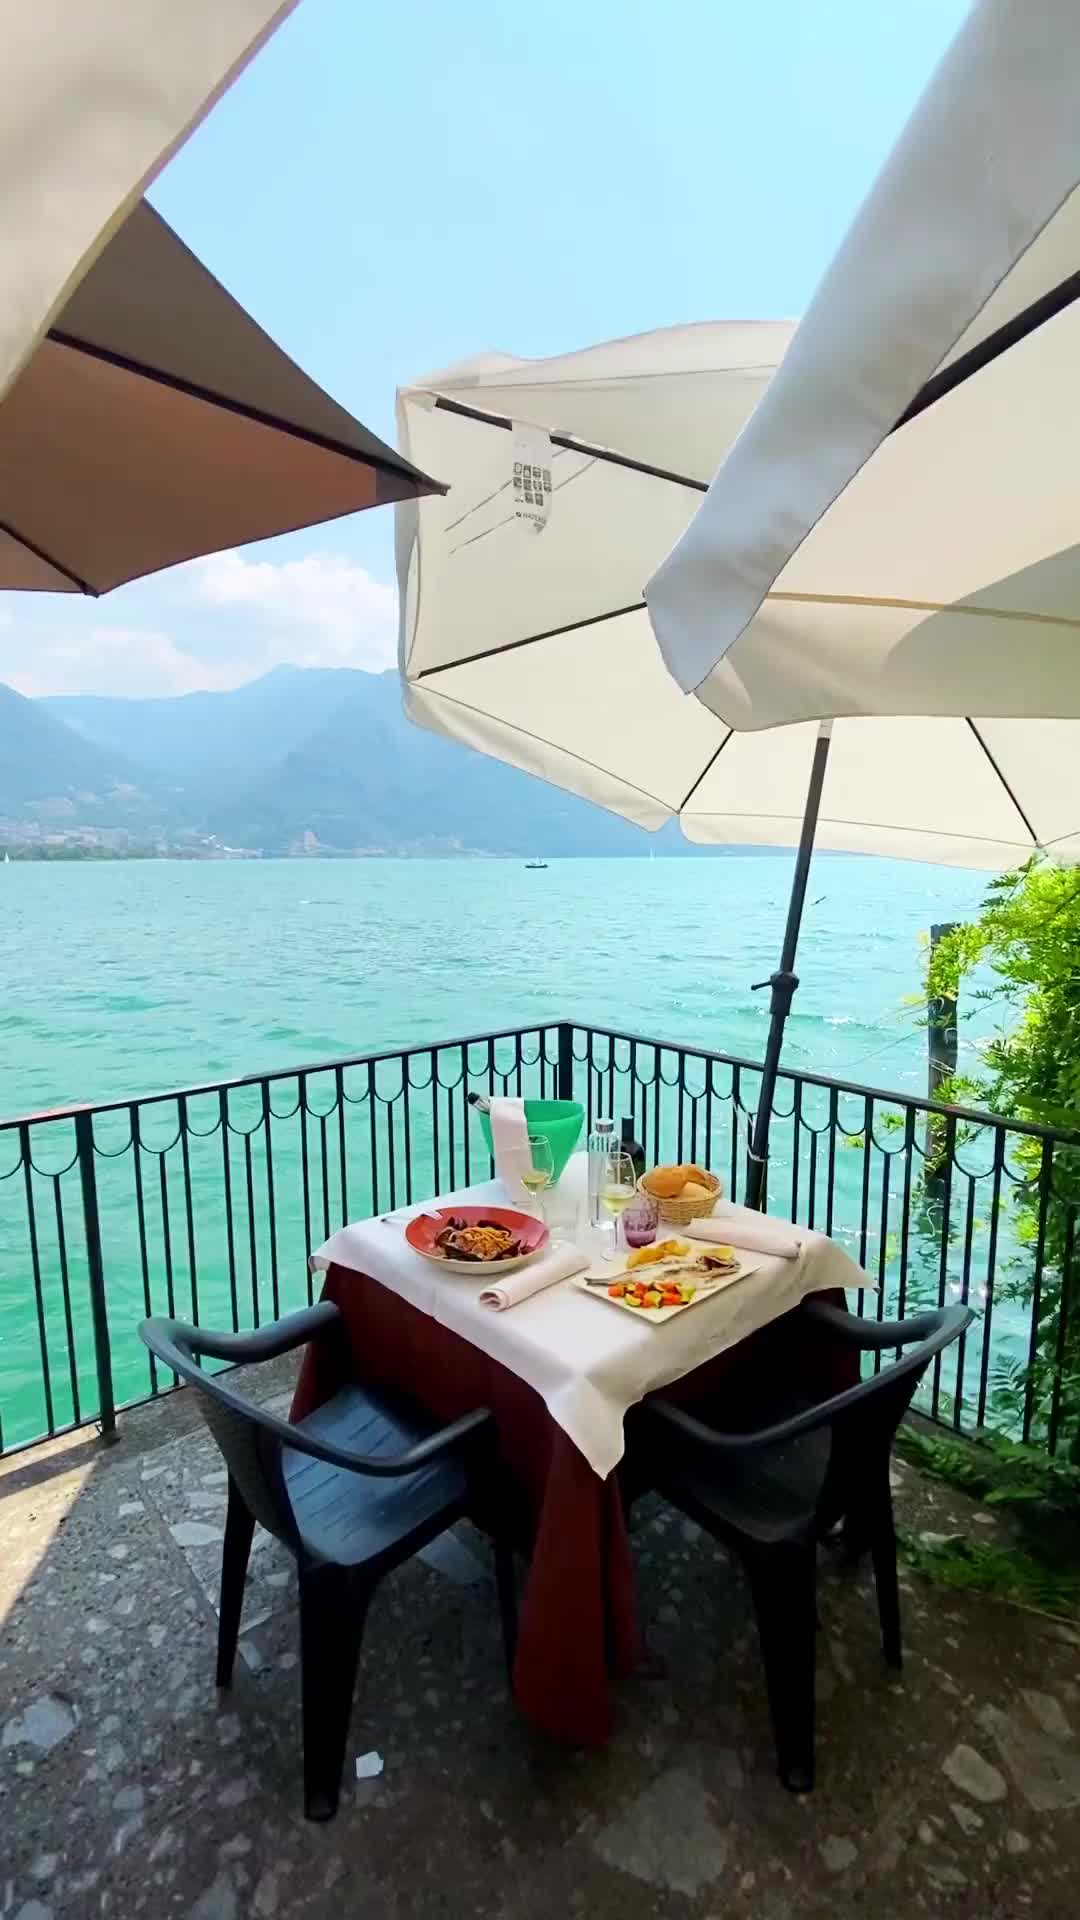 Lunch with a View: Discover Lovere's Hidden Gem